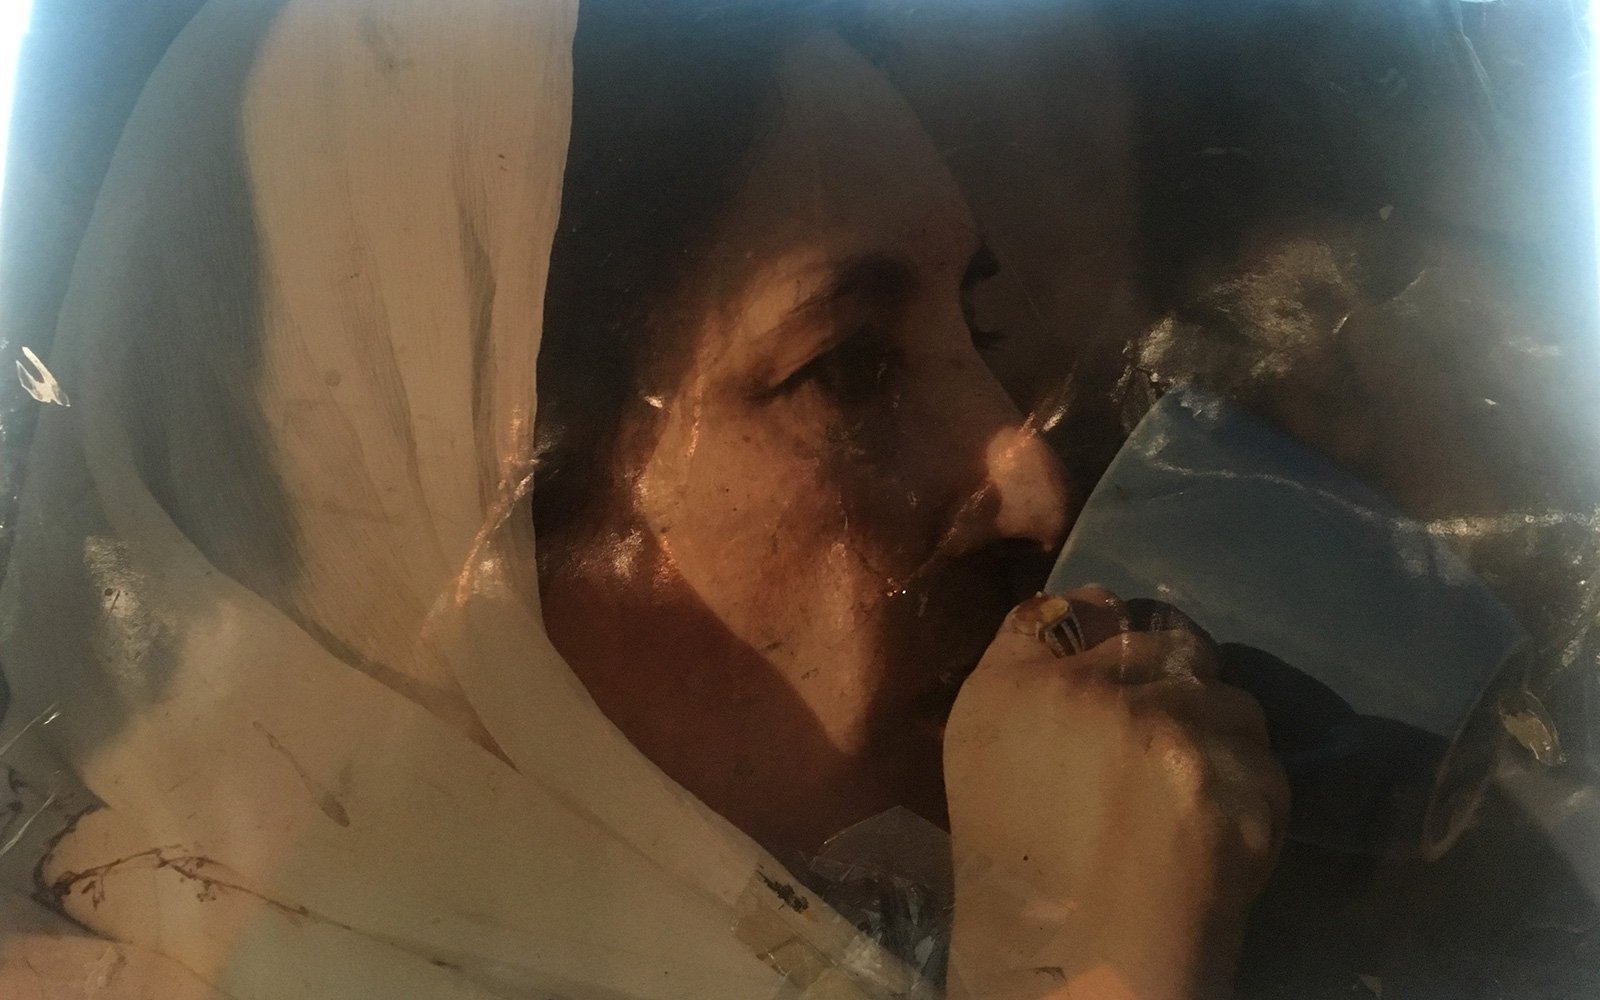 Photograph of Benazir Bhutto from Agha Feroze's collection